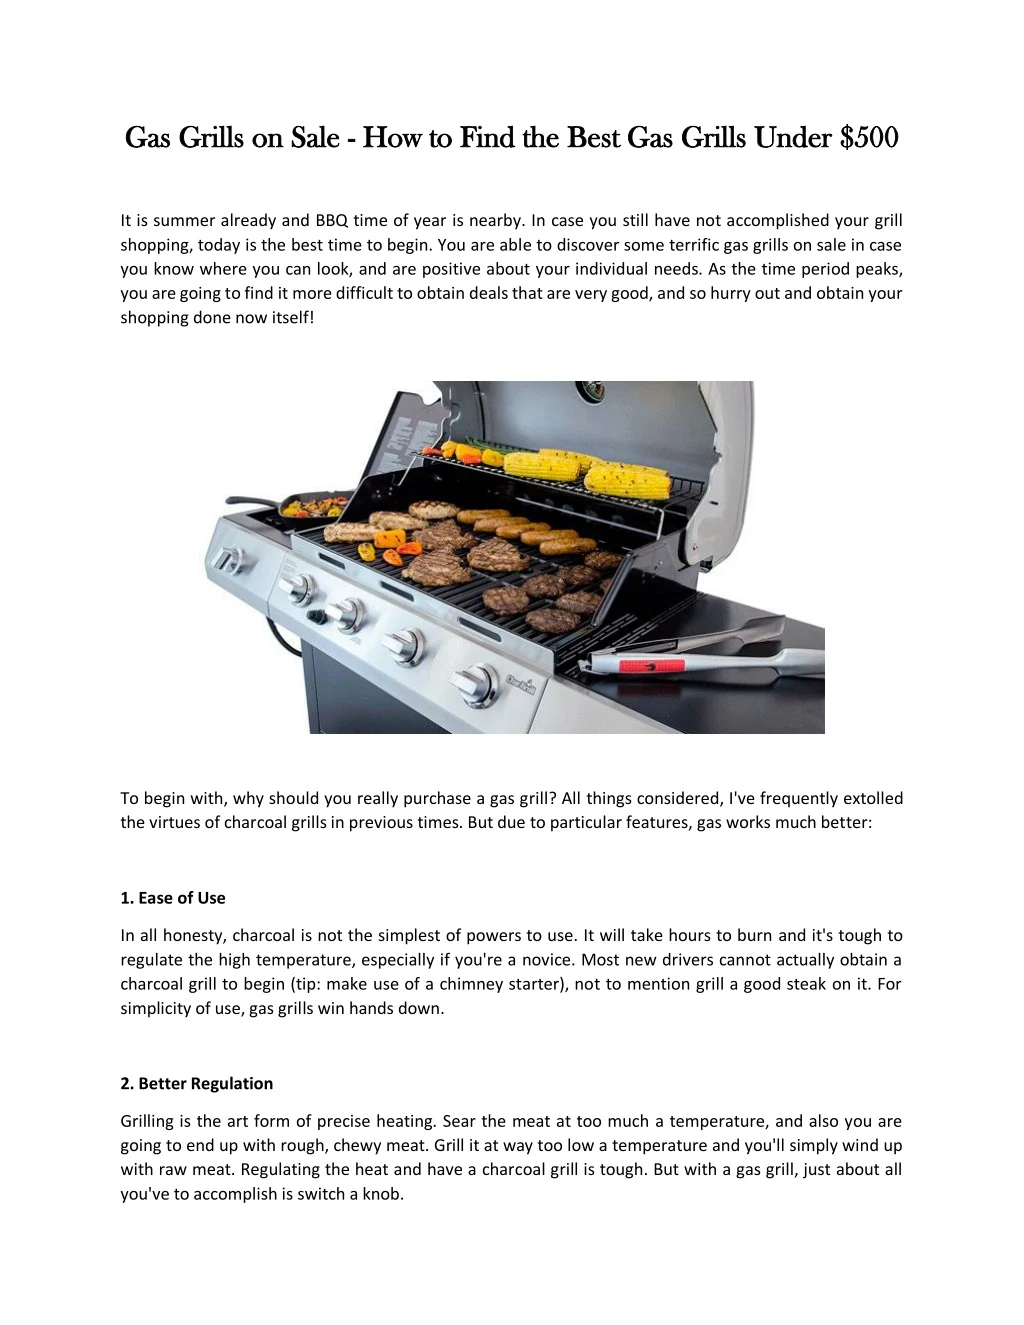 gas grills on sale gas grills on sale how to find